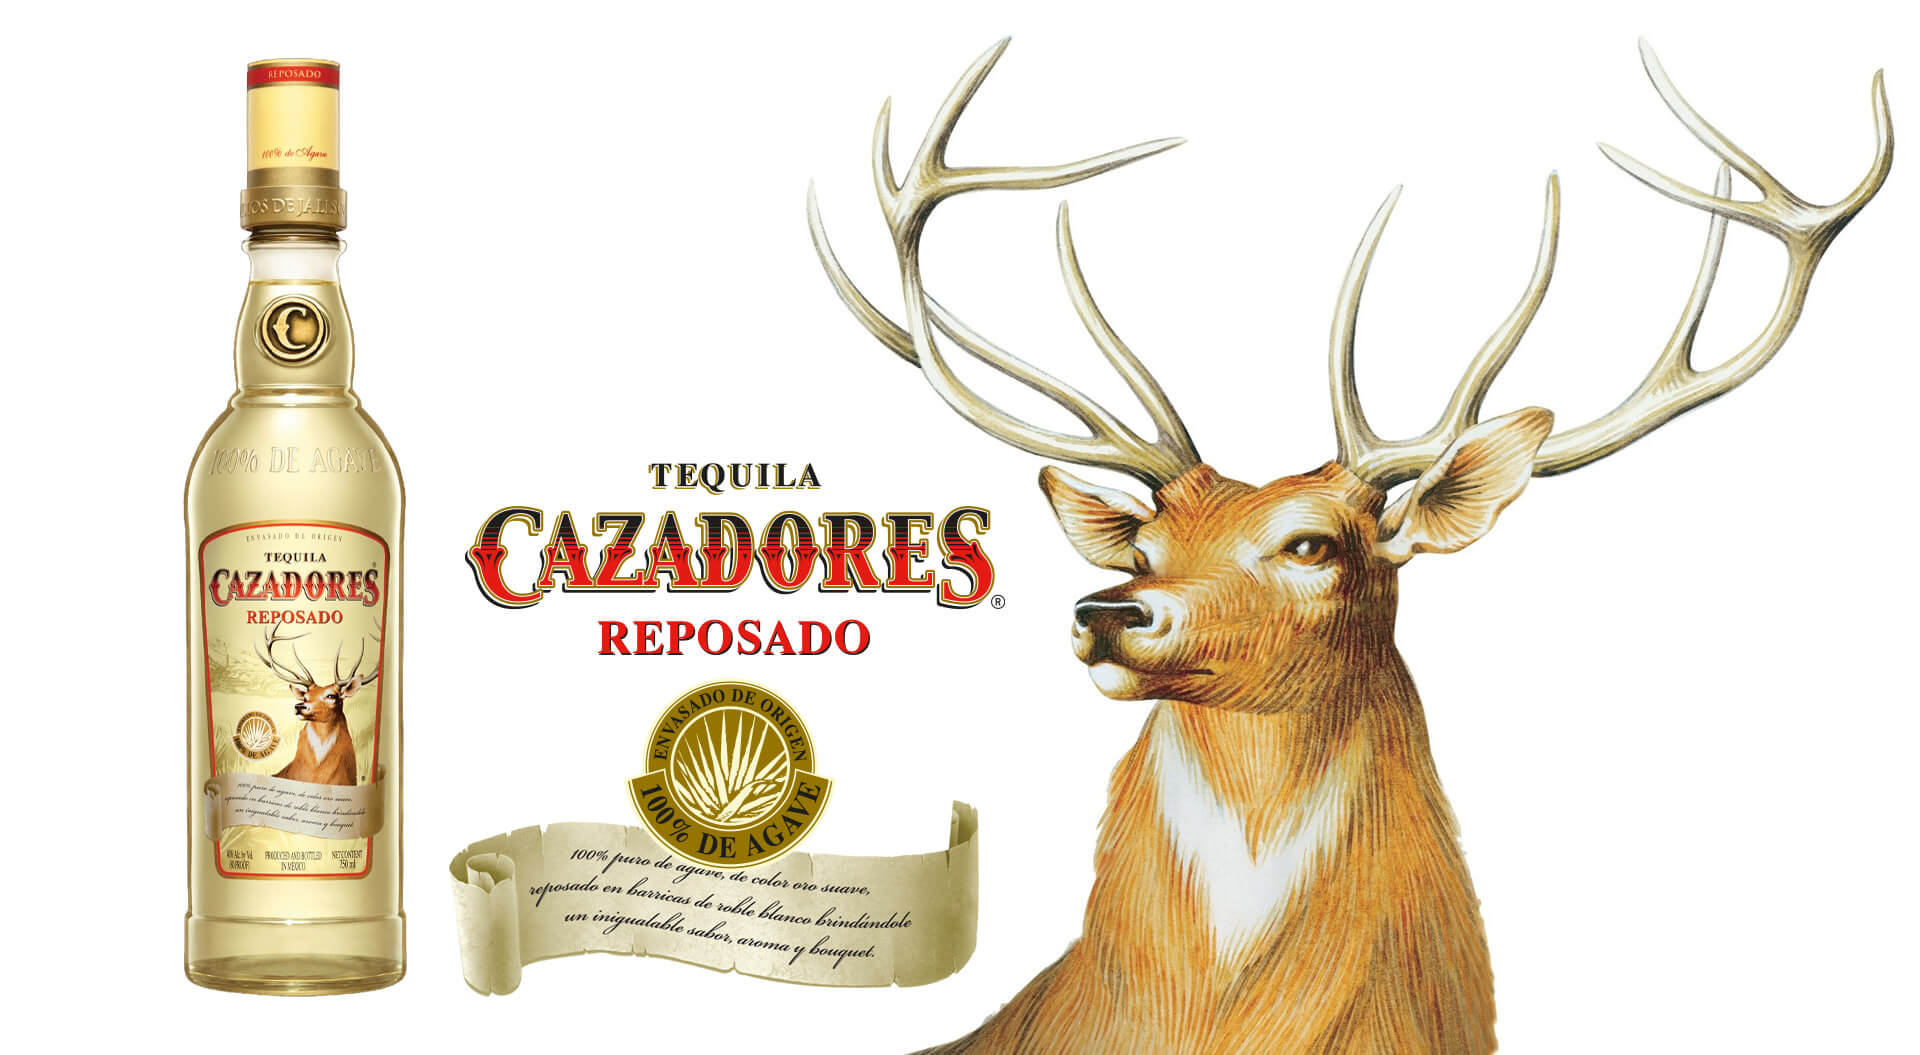 Cazadores Tequila SBacardi Global Travel Retail, promotion campaigns travel retail, El Paso Texas marketing, airport, duty-free alcohol 